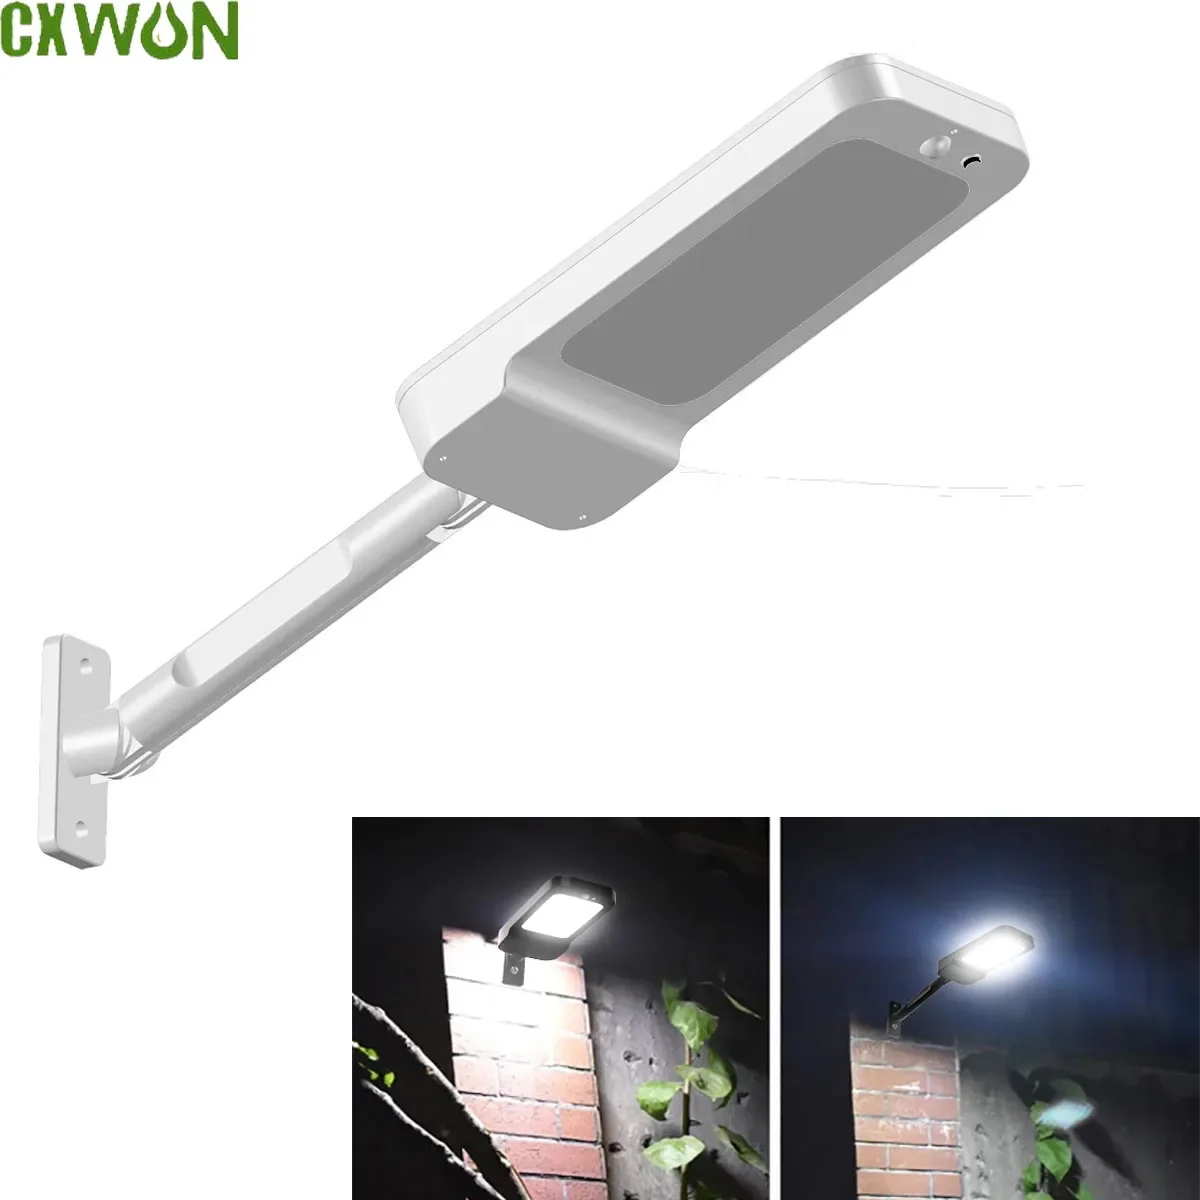 outdoor solar lamp 138 led with remote control motion detector 6500k led ip65 waterproof 3 modes security wall lights for garden Outdoor Solar Lamp with Motion Detector LED Solar Powered Wall Lights 4 Modes Lighting Security Flood Light for Garden Fence